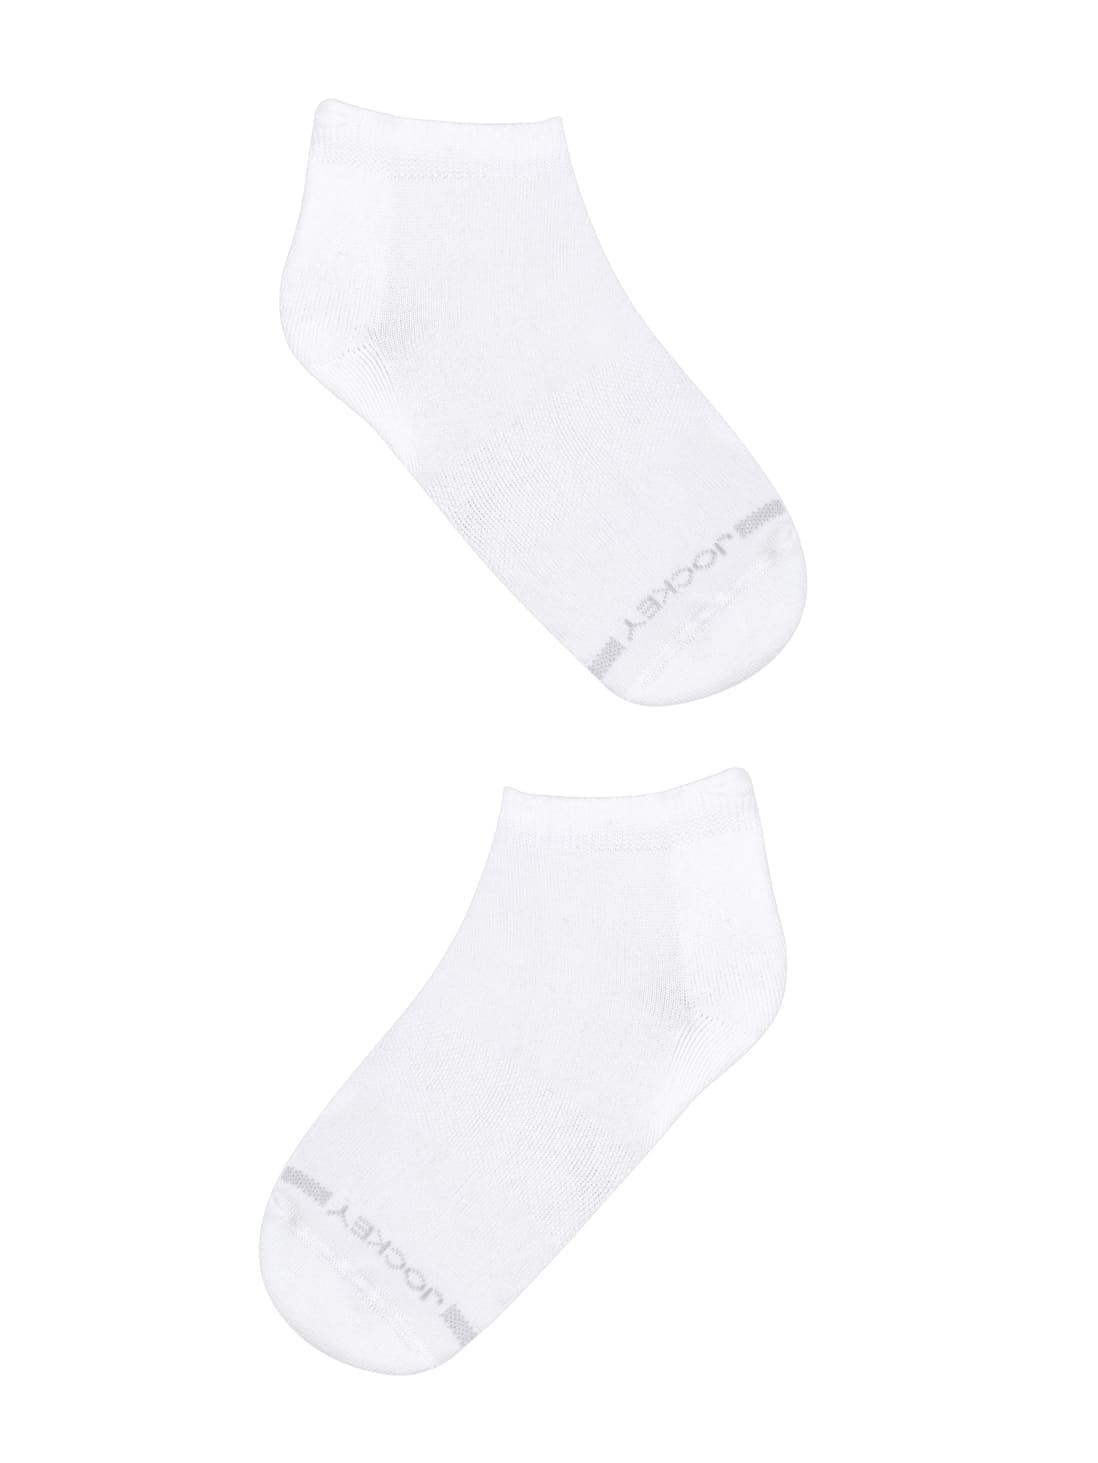 Buy Men's Compact Cotton Stretch Low Show Socks with Stay Fresh ...